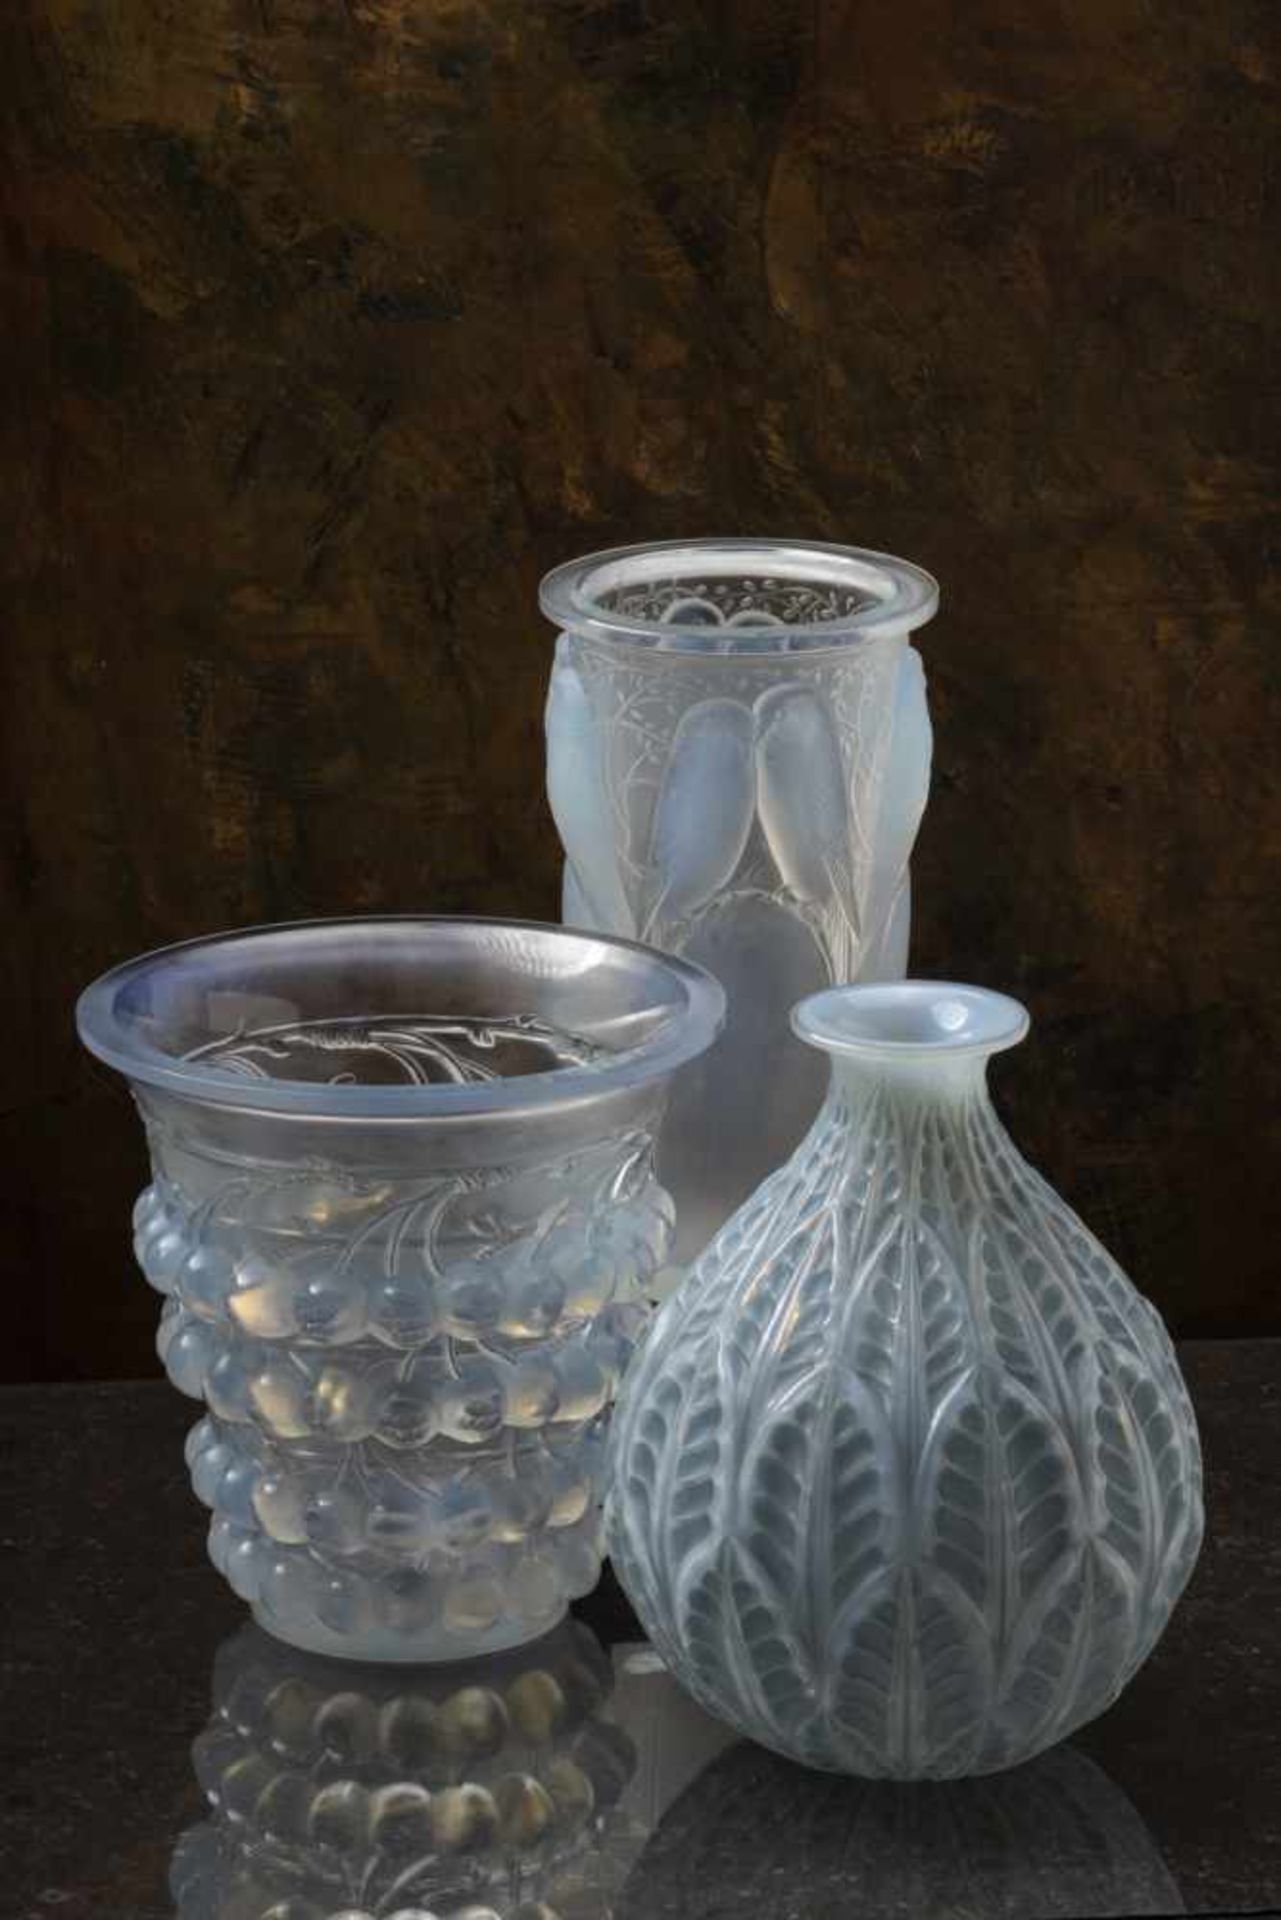 René Lalique, 'Ceylan' vase, 1924'Ceylan' vase, 1924H. 24.3 cm. Clear, moulded glass, satined and - Image 9 of 10